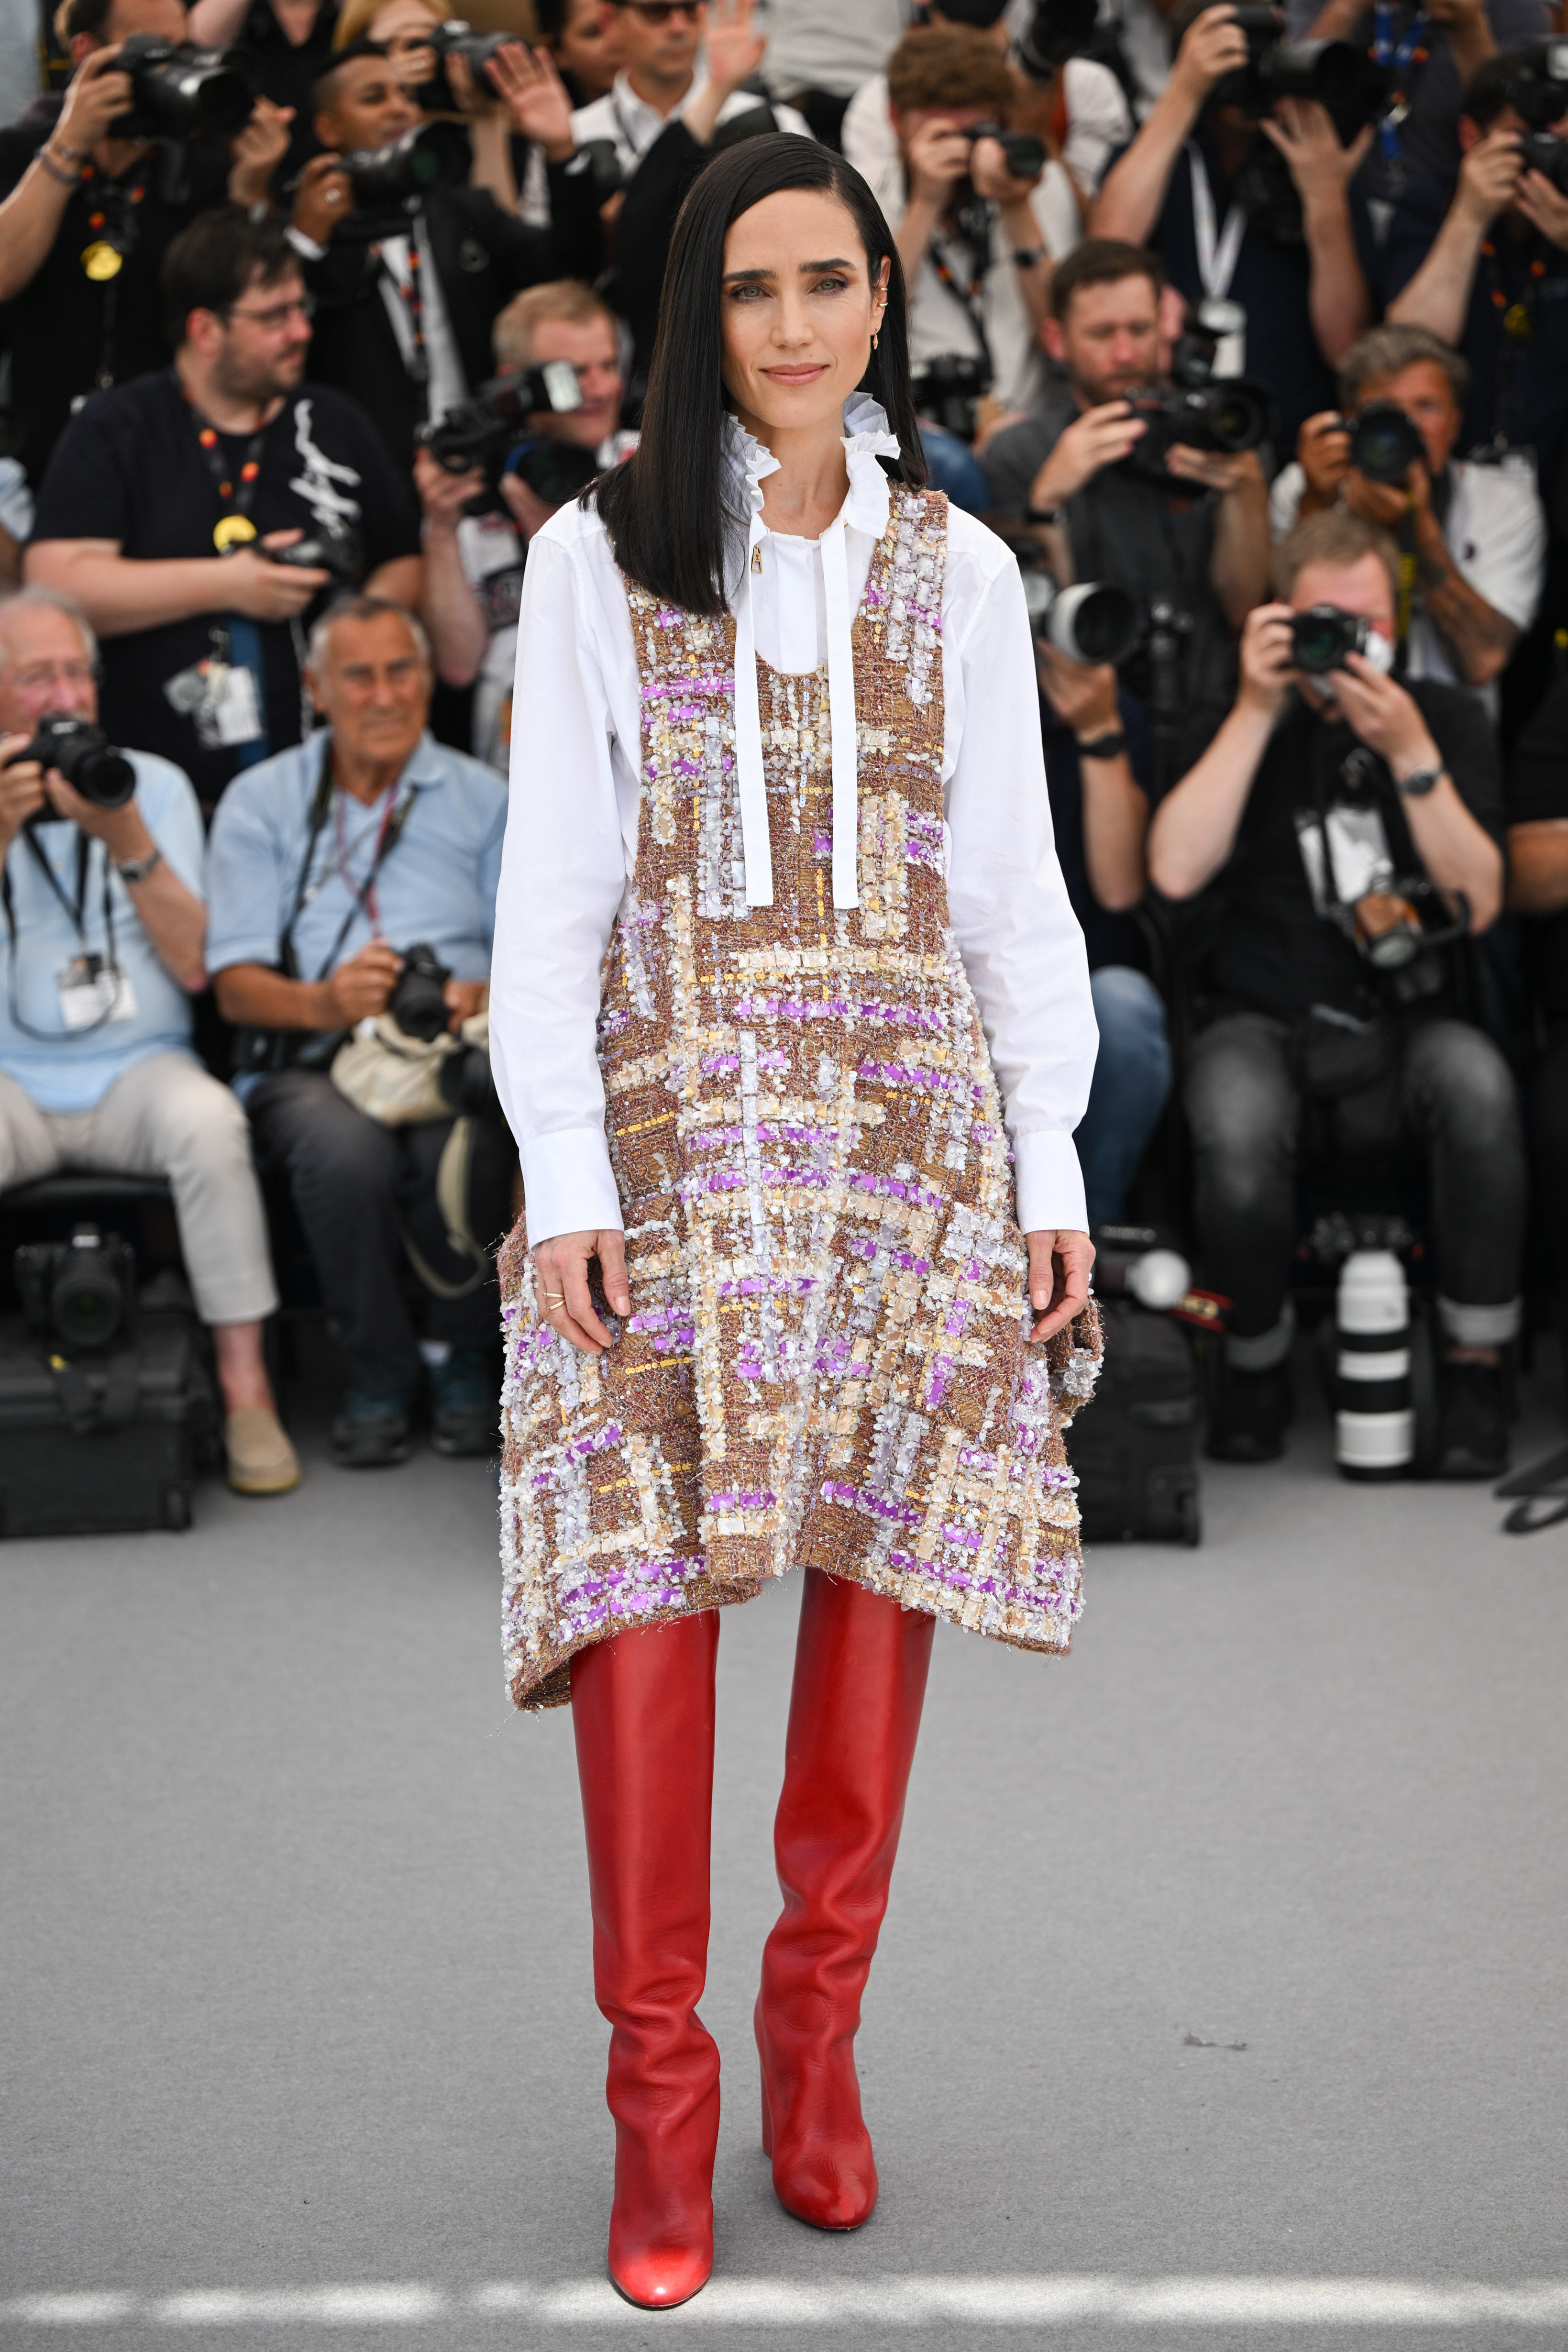 Model Sara Ziff walks the runway in the Louis Vuitton Spring 2005 News  Photo - Getty Images